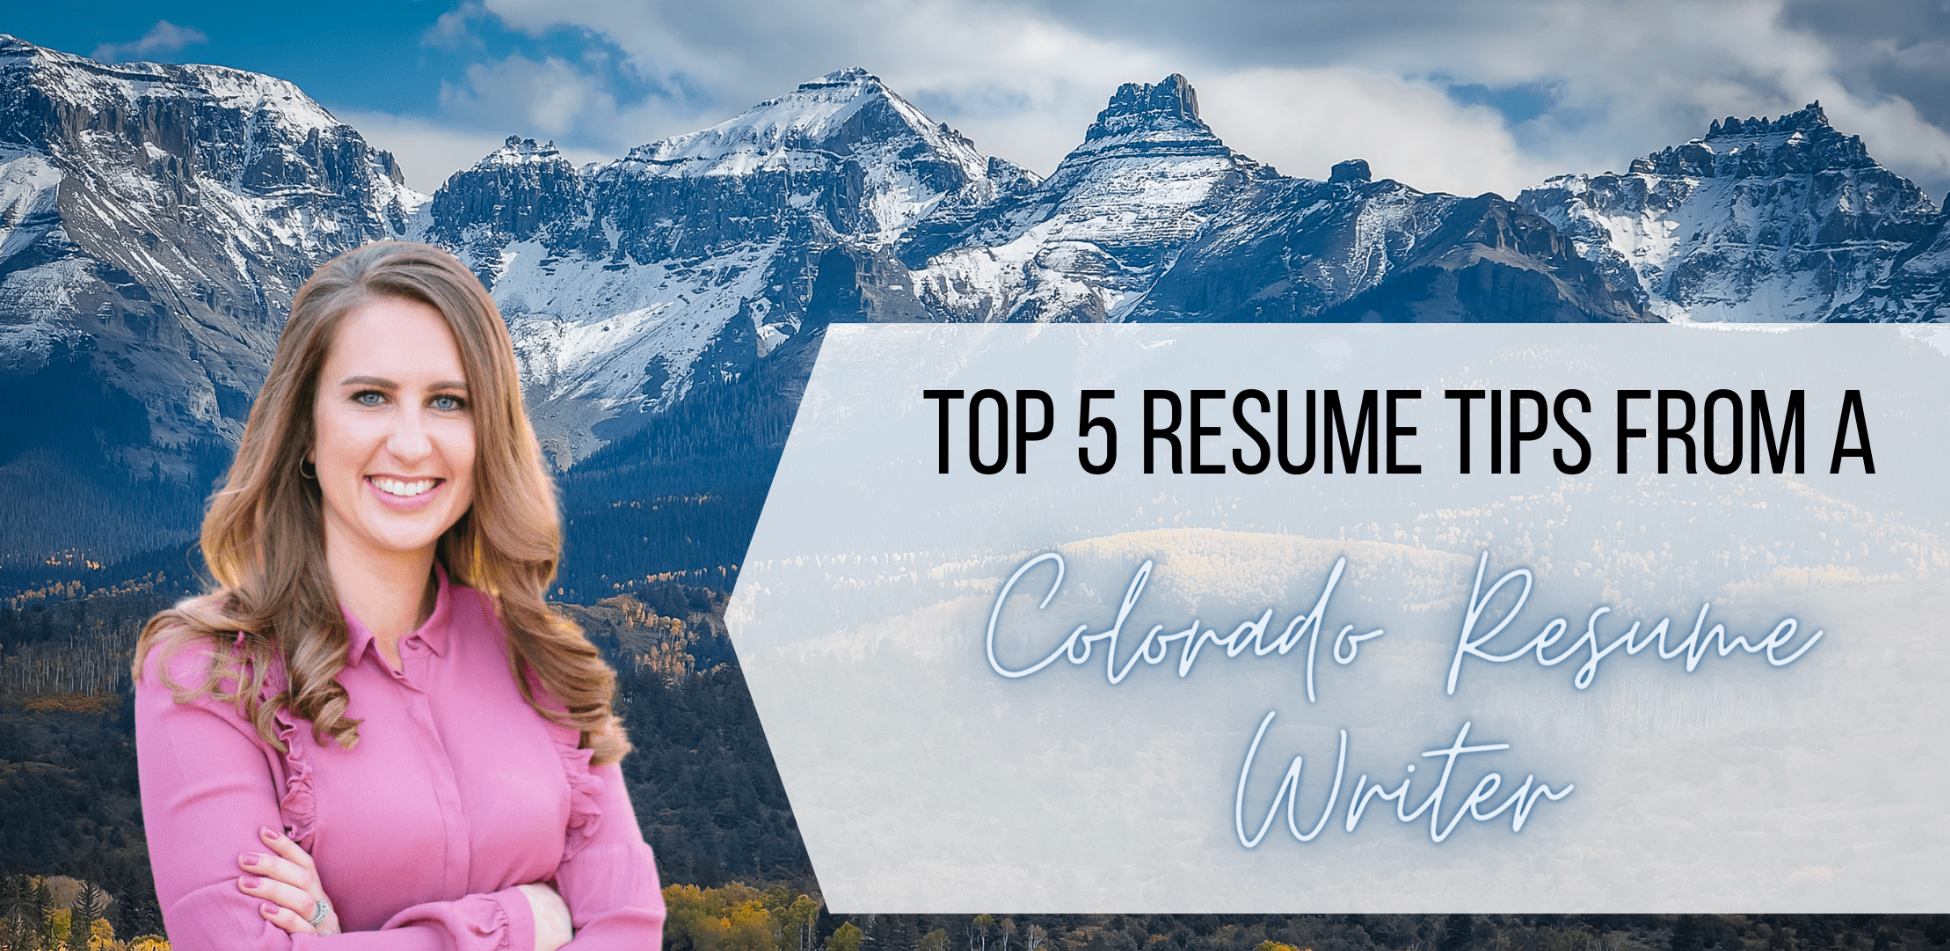 You are currently viewing Top 5 Resume Tips from a Colorado Resume Writer